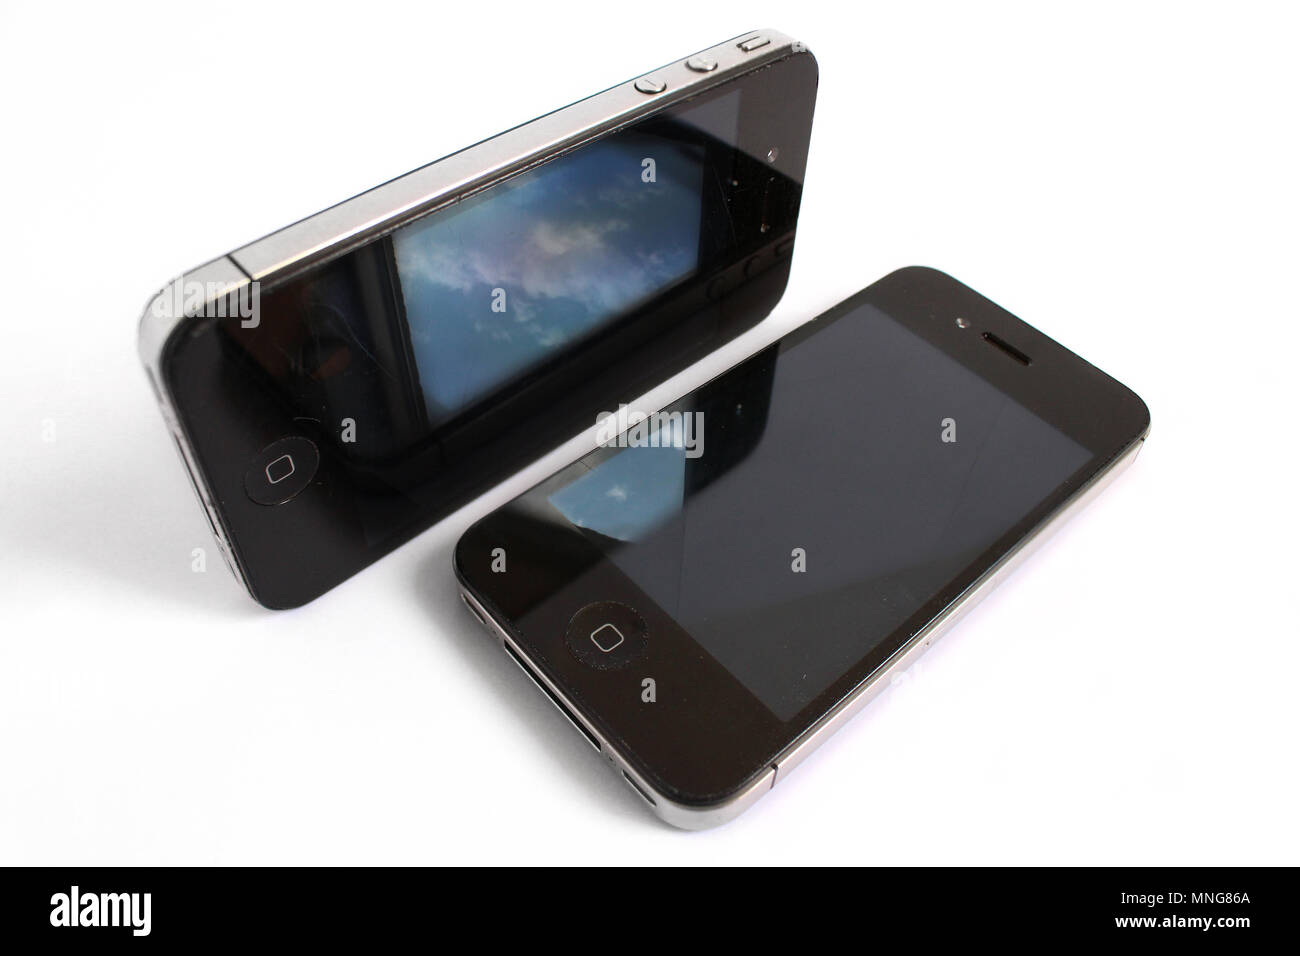 Iphone 4 and i-phone four s, double smatphone Stock Photo